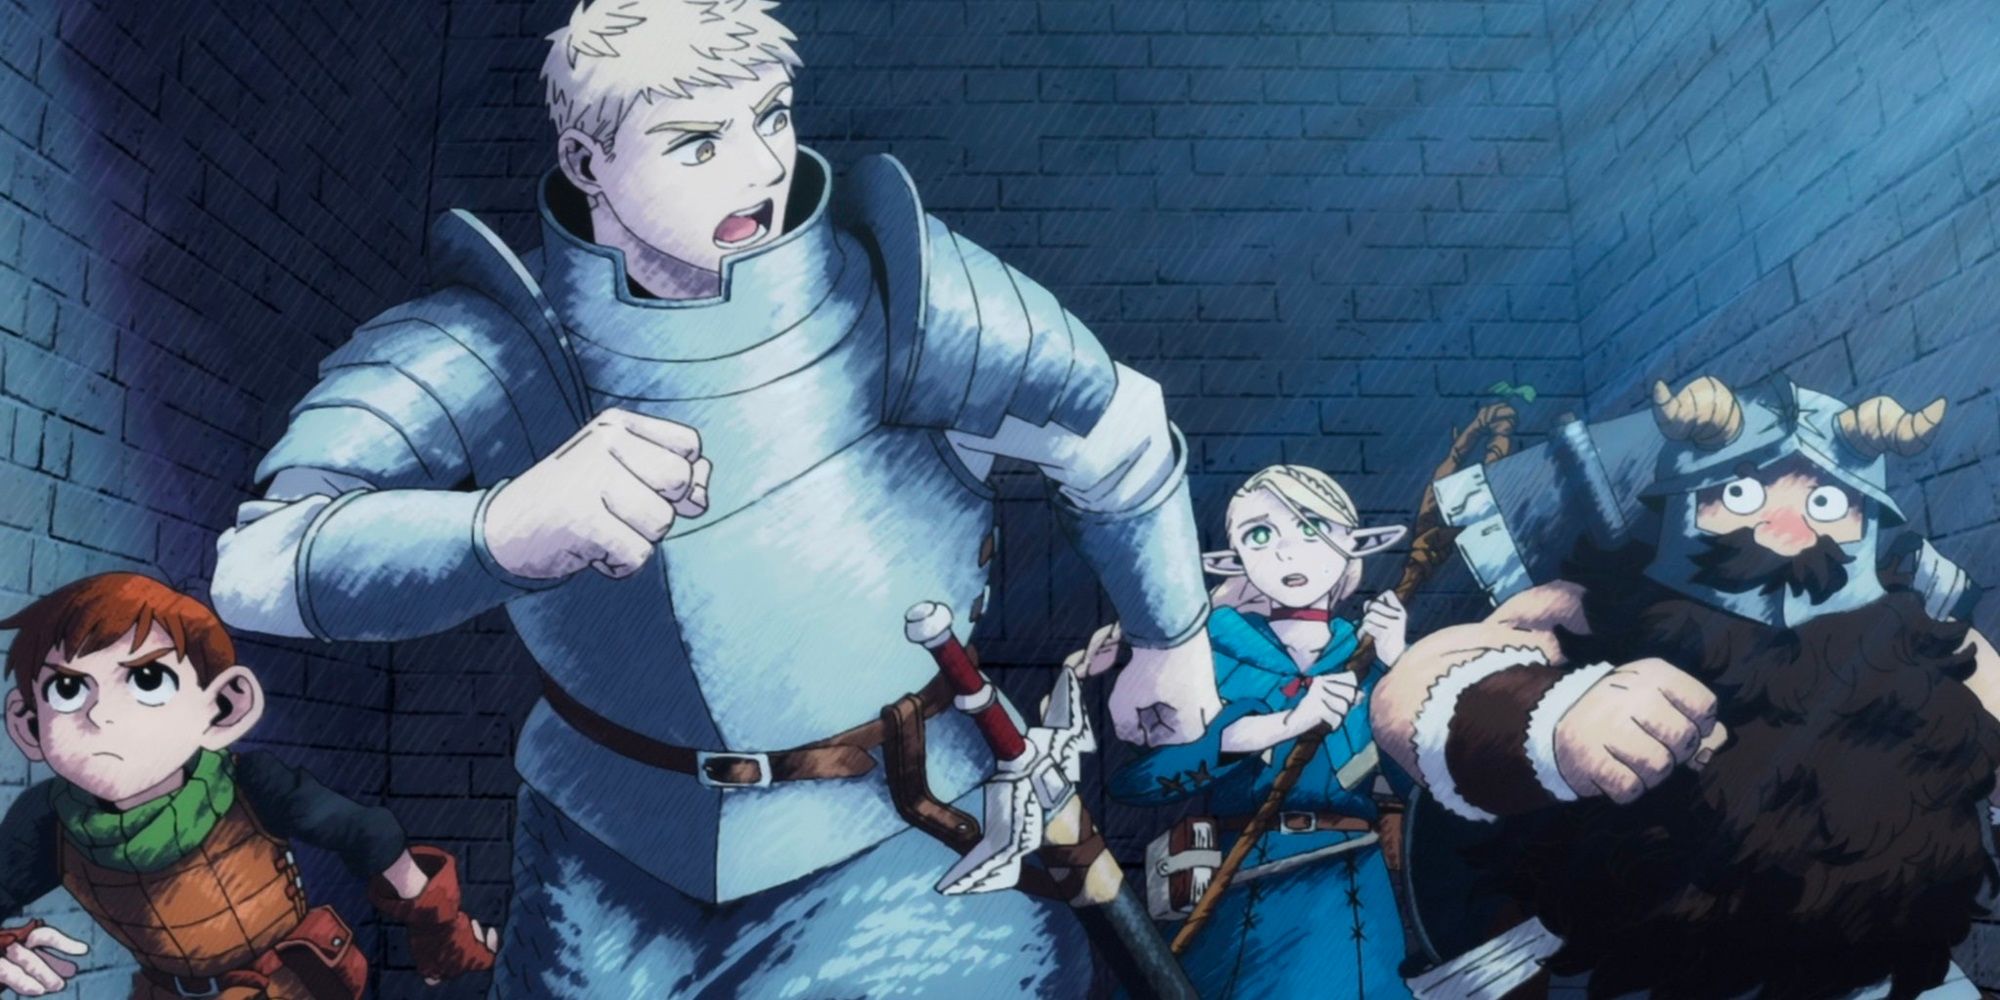 Delicious In Dungeon Episode 10 screencap of the Touden Party running through the dungeon.